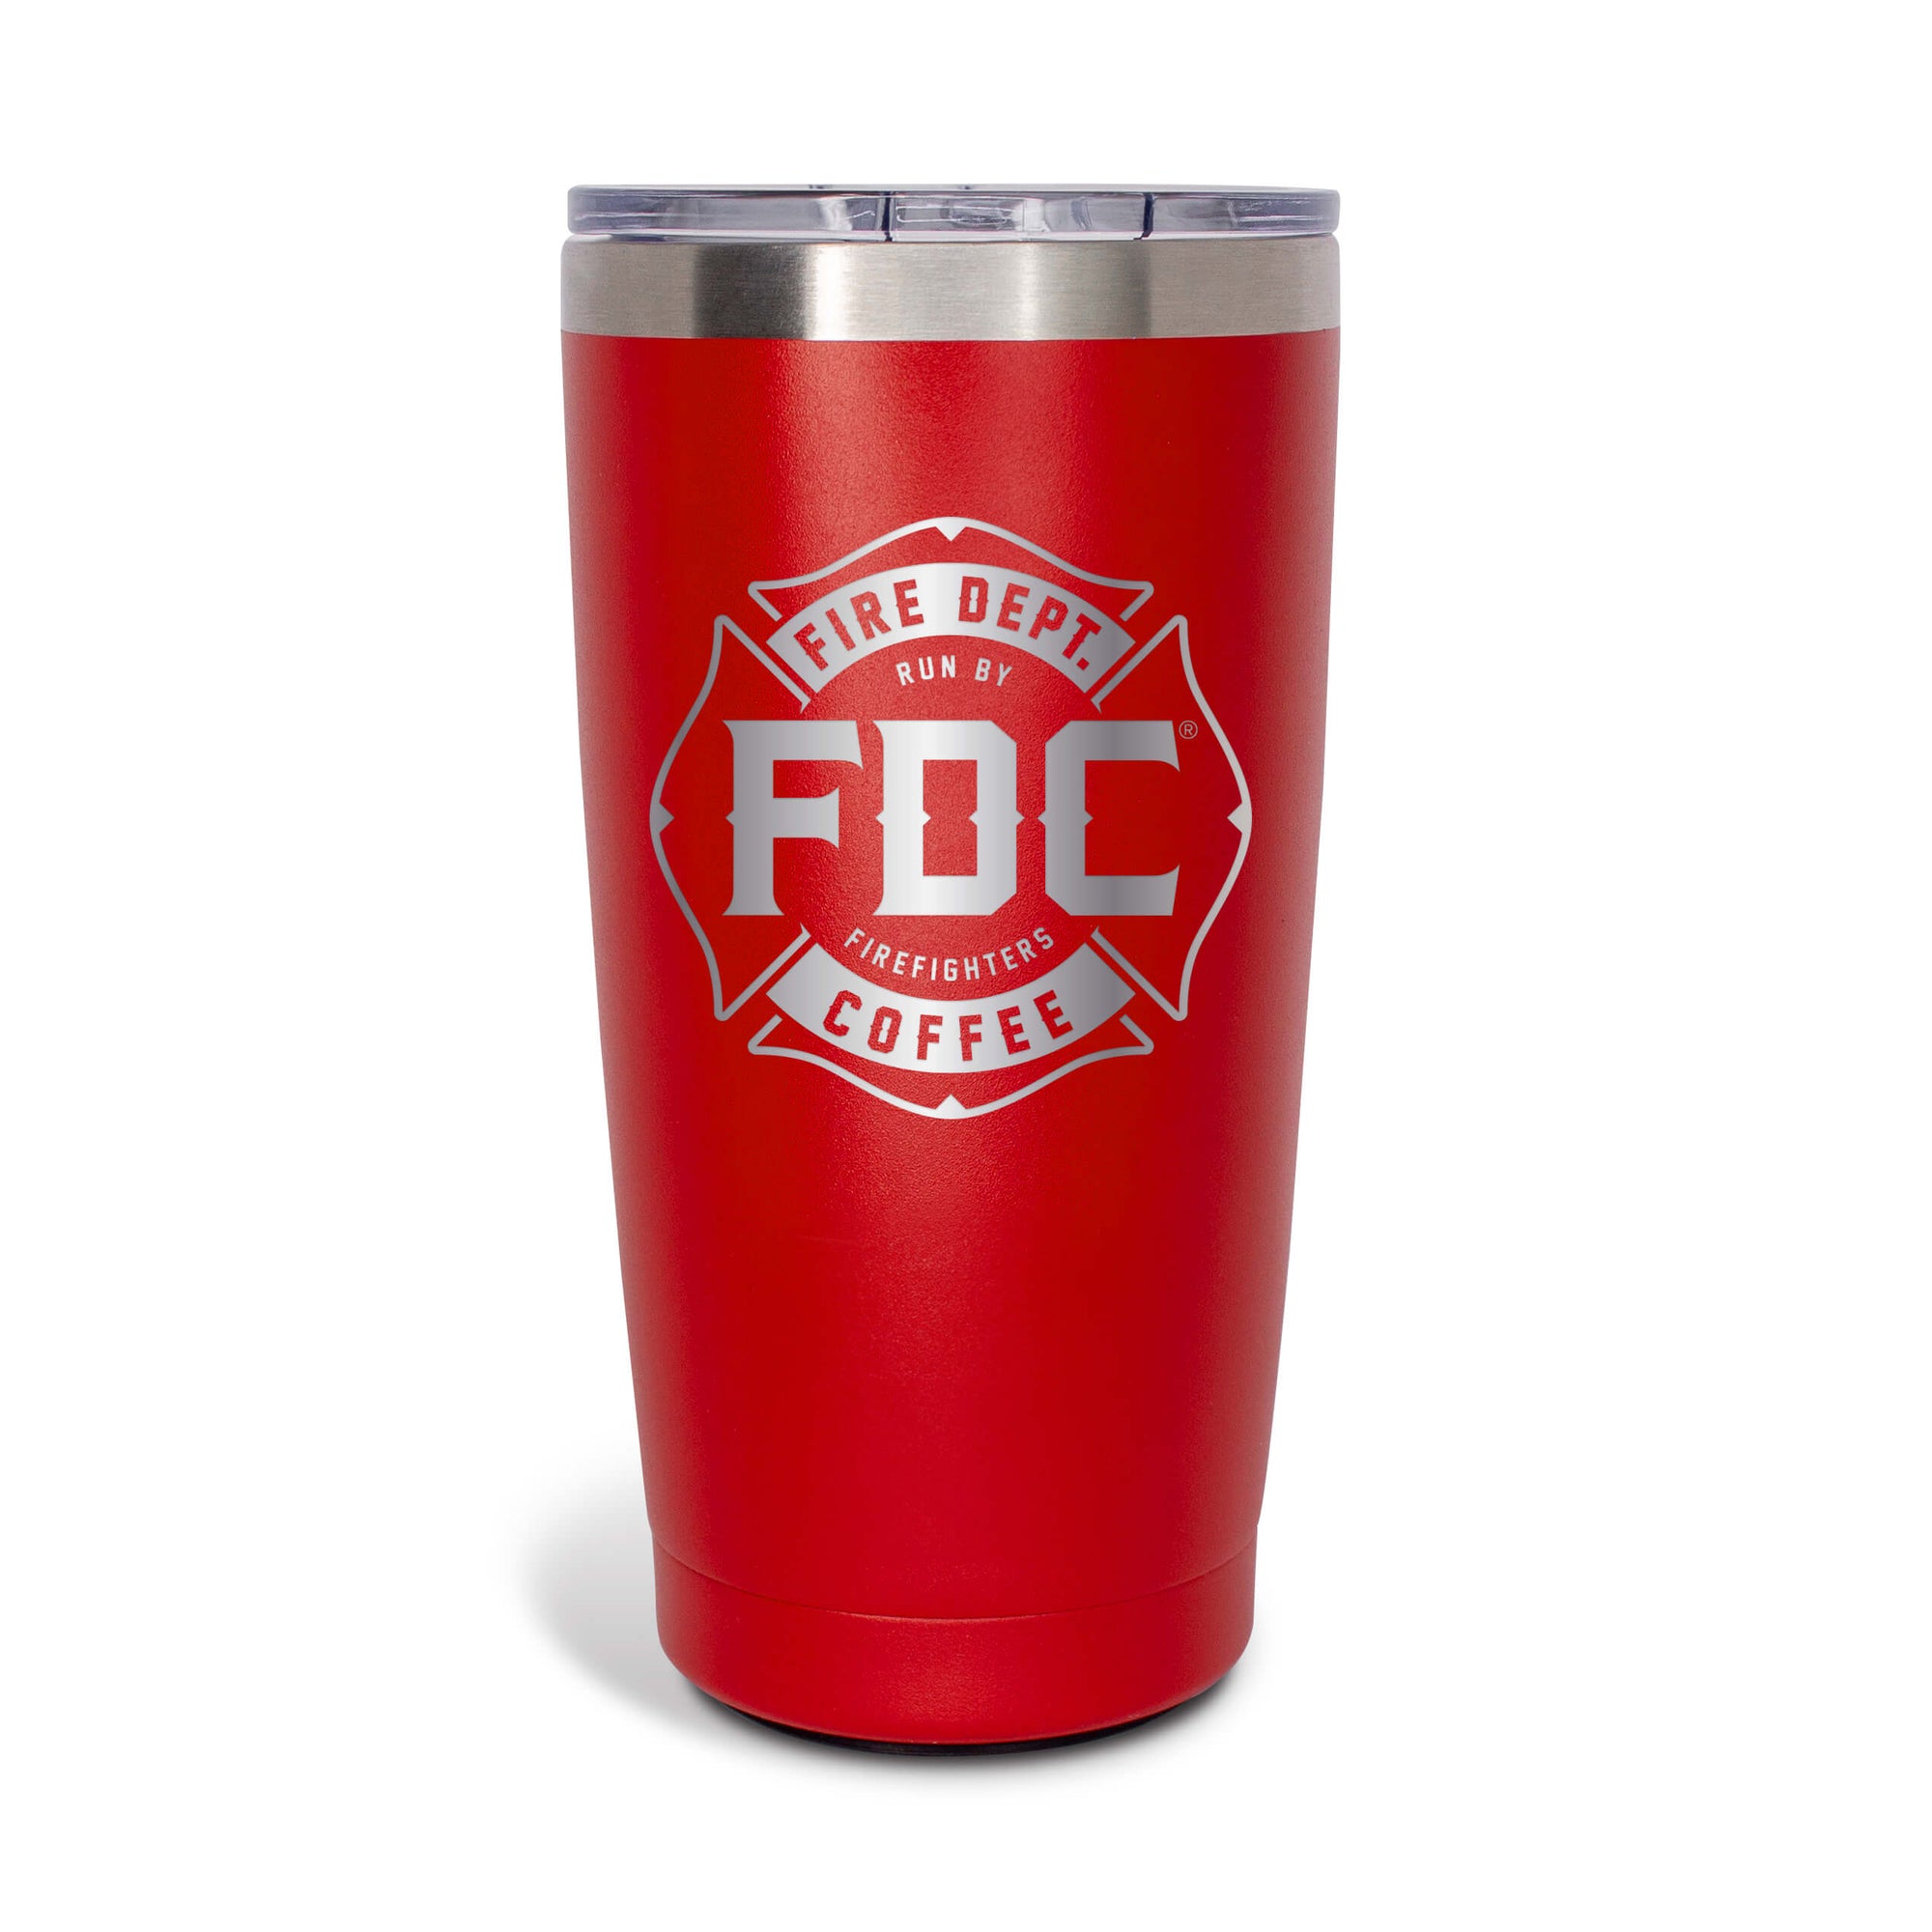 A 20 oz red tumbler with the FDC maltese cross logo engrave on the front.